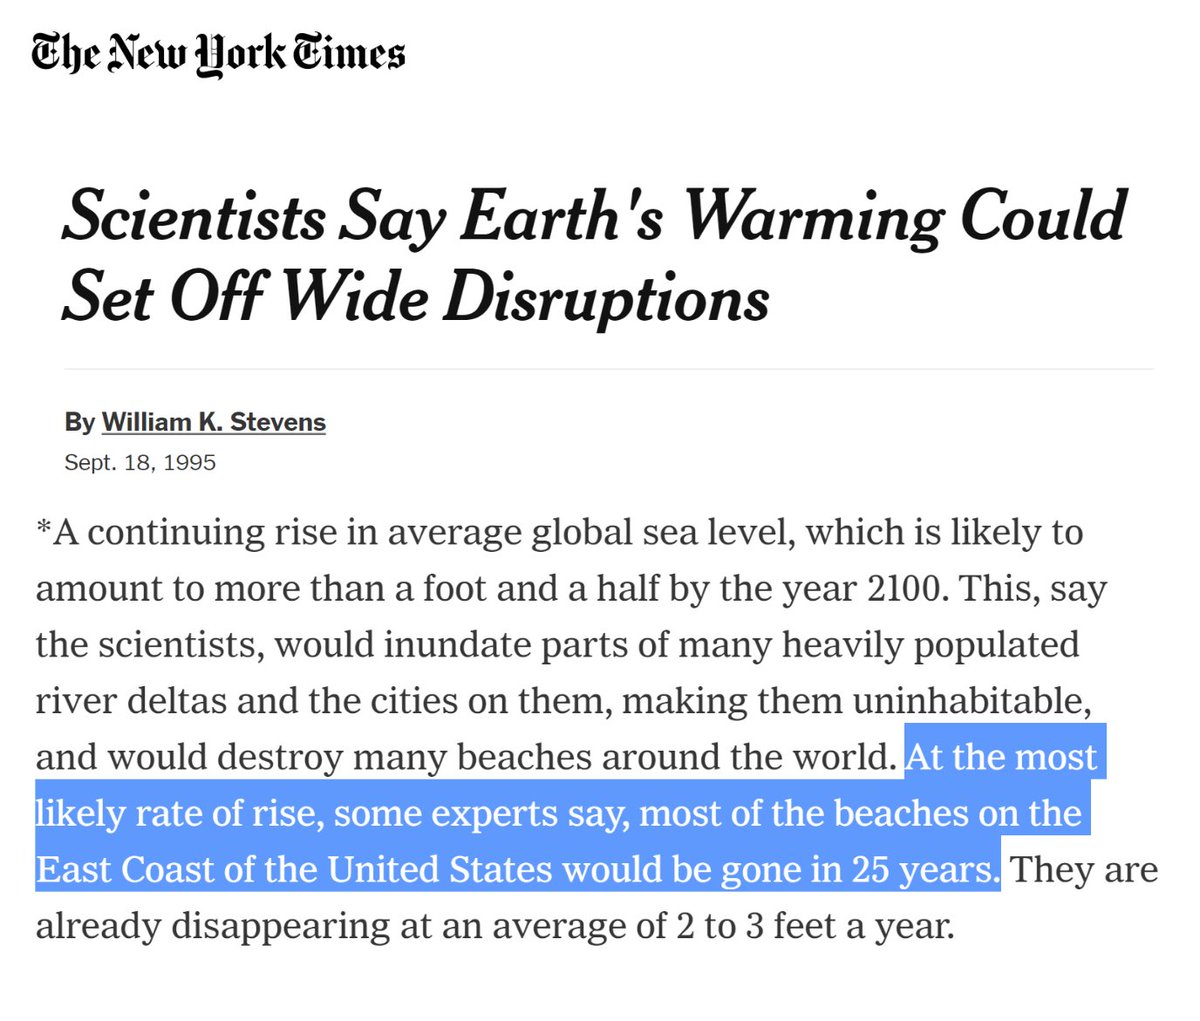 In 1995, experts told the NY Times that east coast beaches would be wiped out by 2020; forecasts based on models. Despite being wrong, rapid acceleration scenarios are still used today. Obviously didn't learn a darn thing. “Climate science is where arrogance and ignorance meet.”